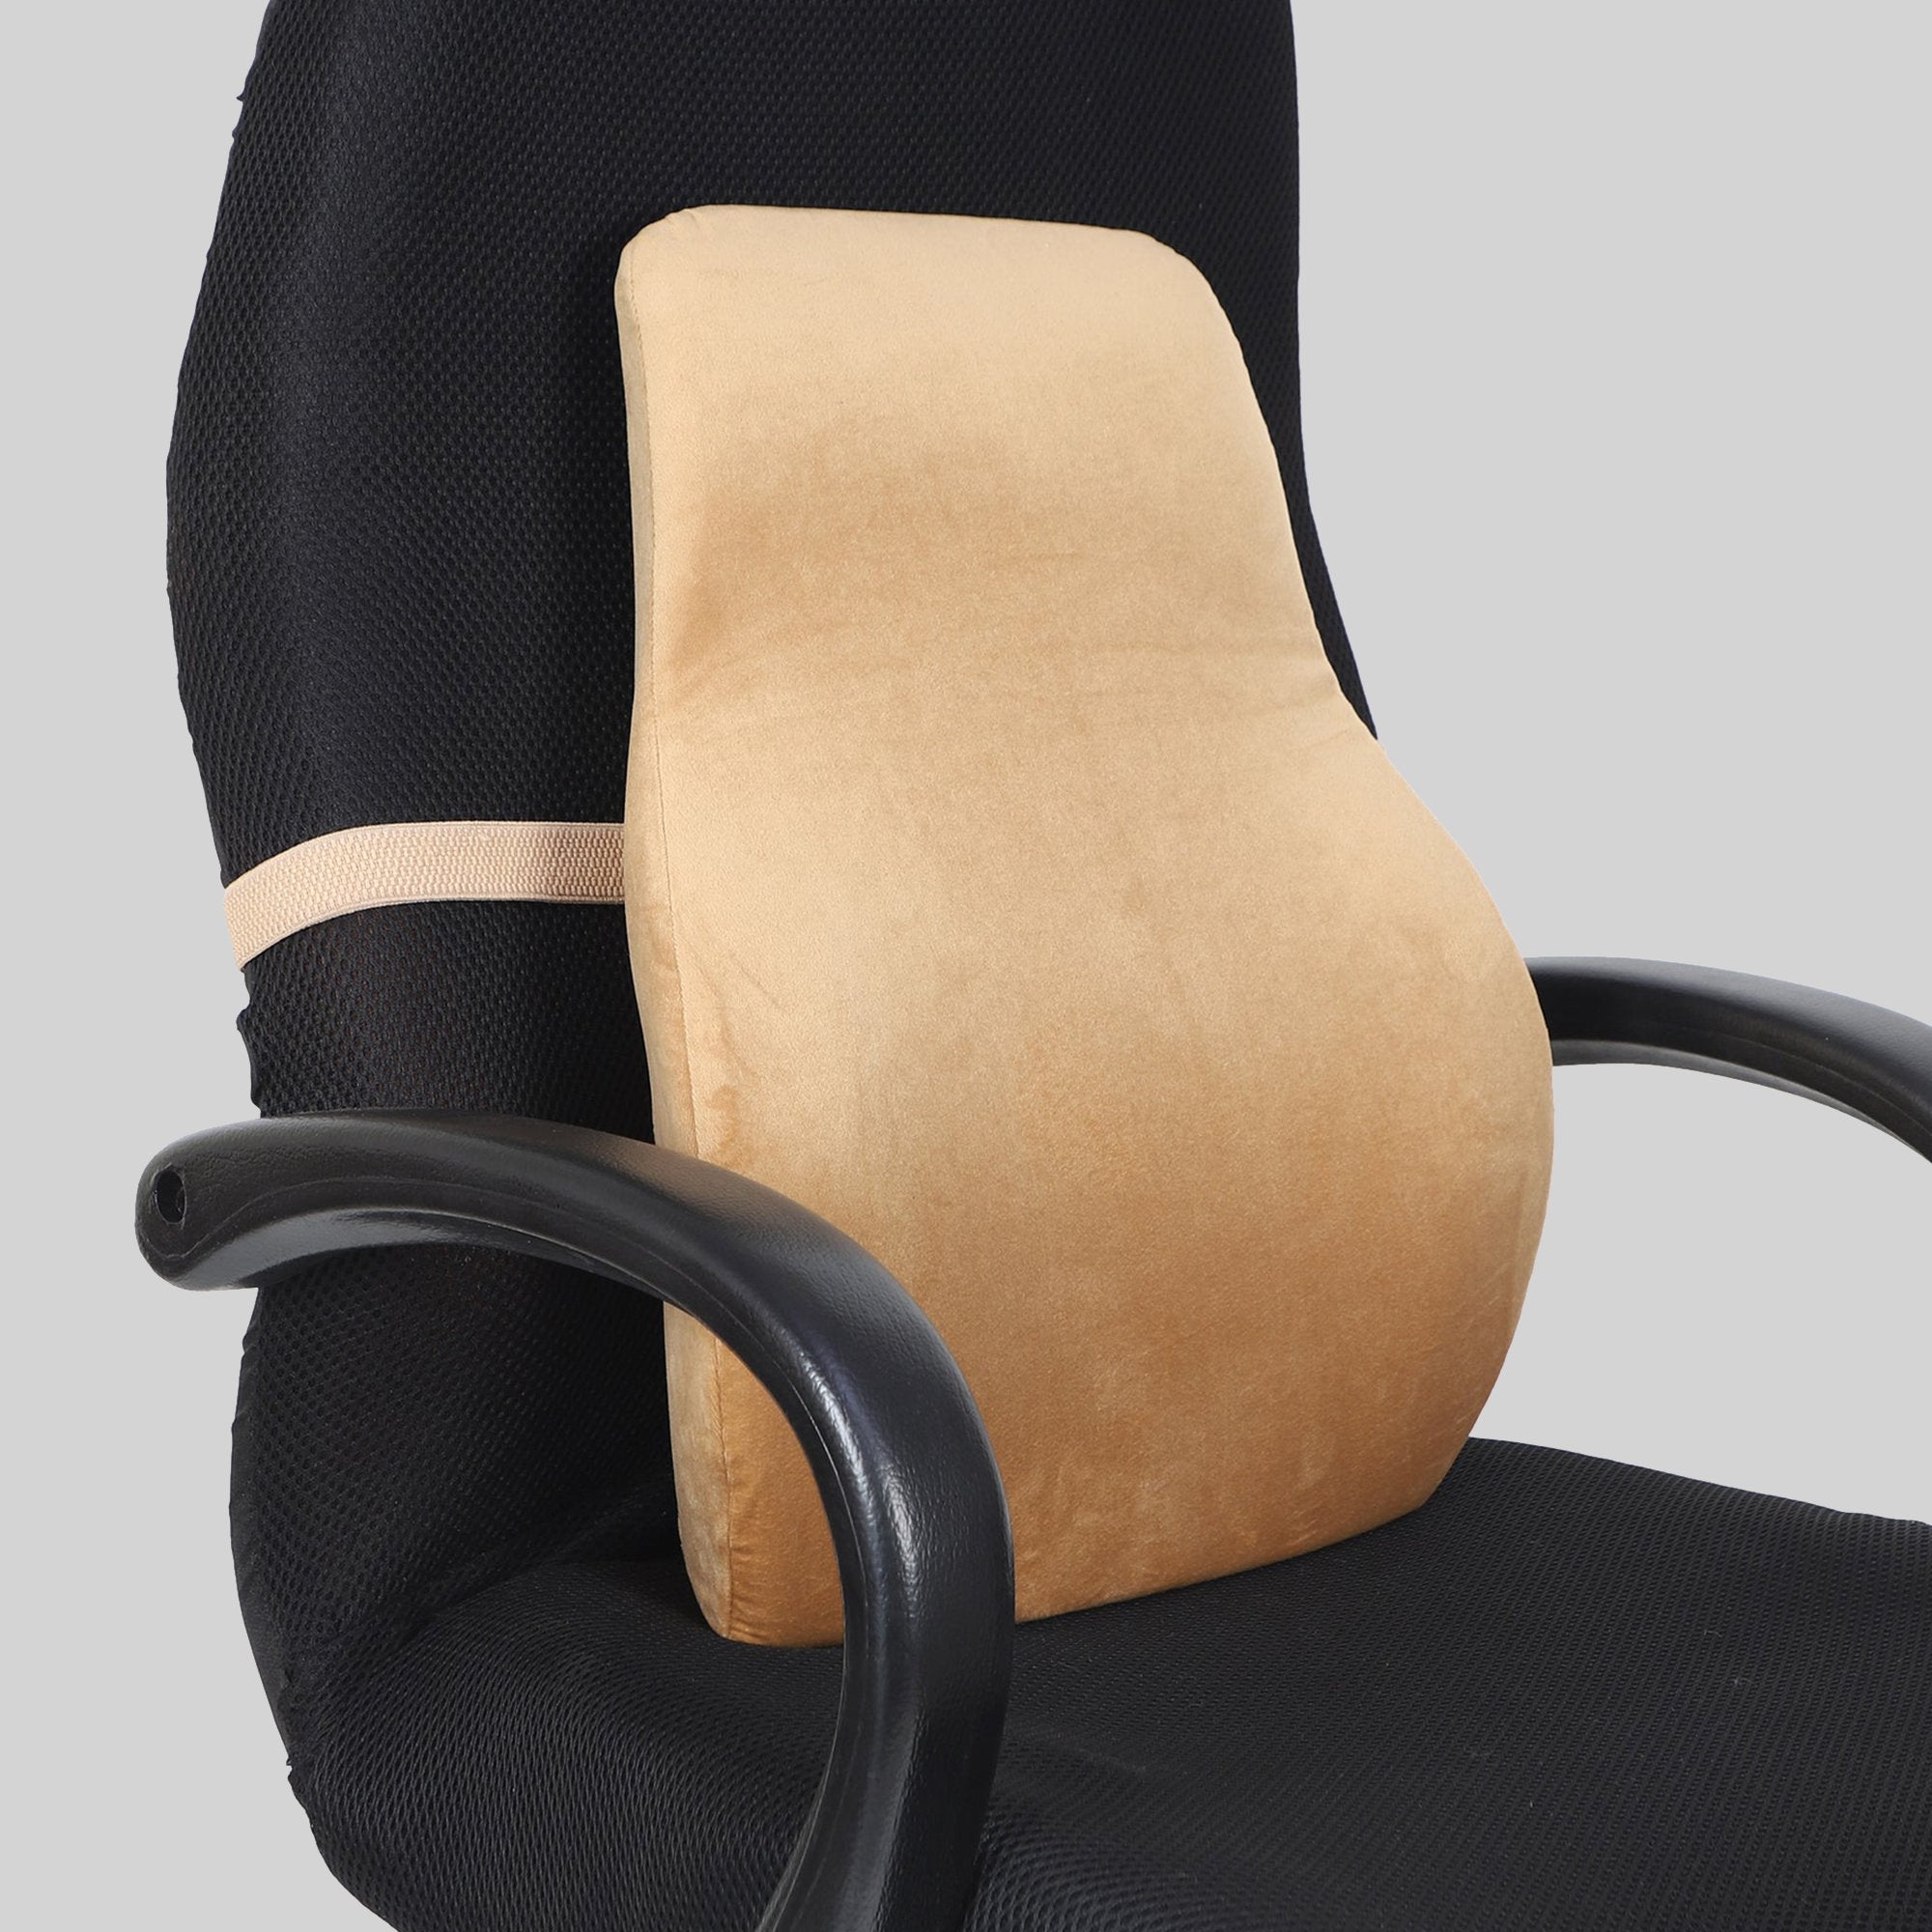  matvio Back Support Pillow for Office Chair